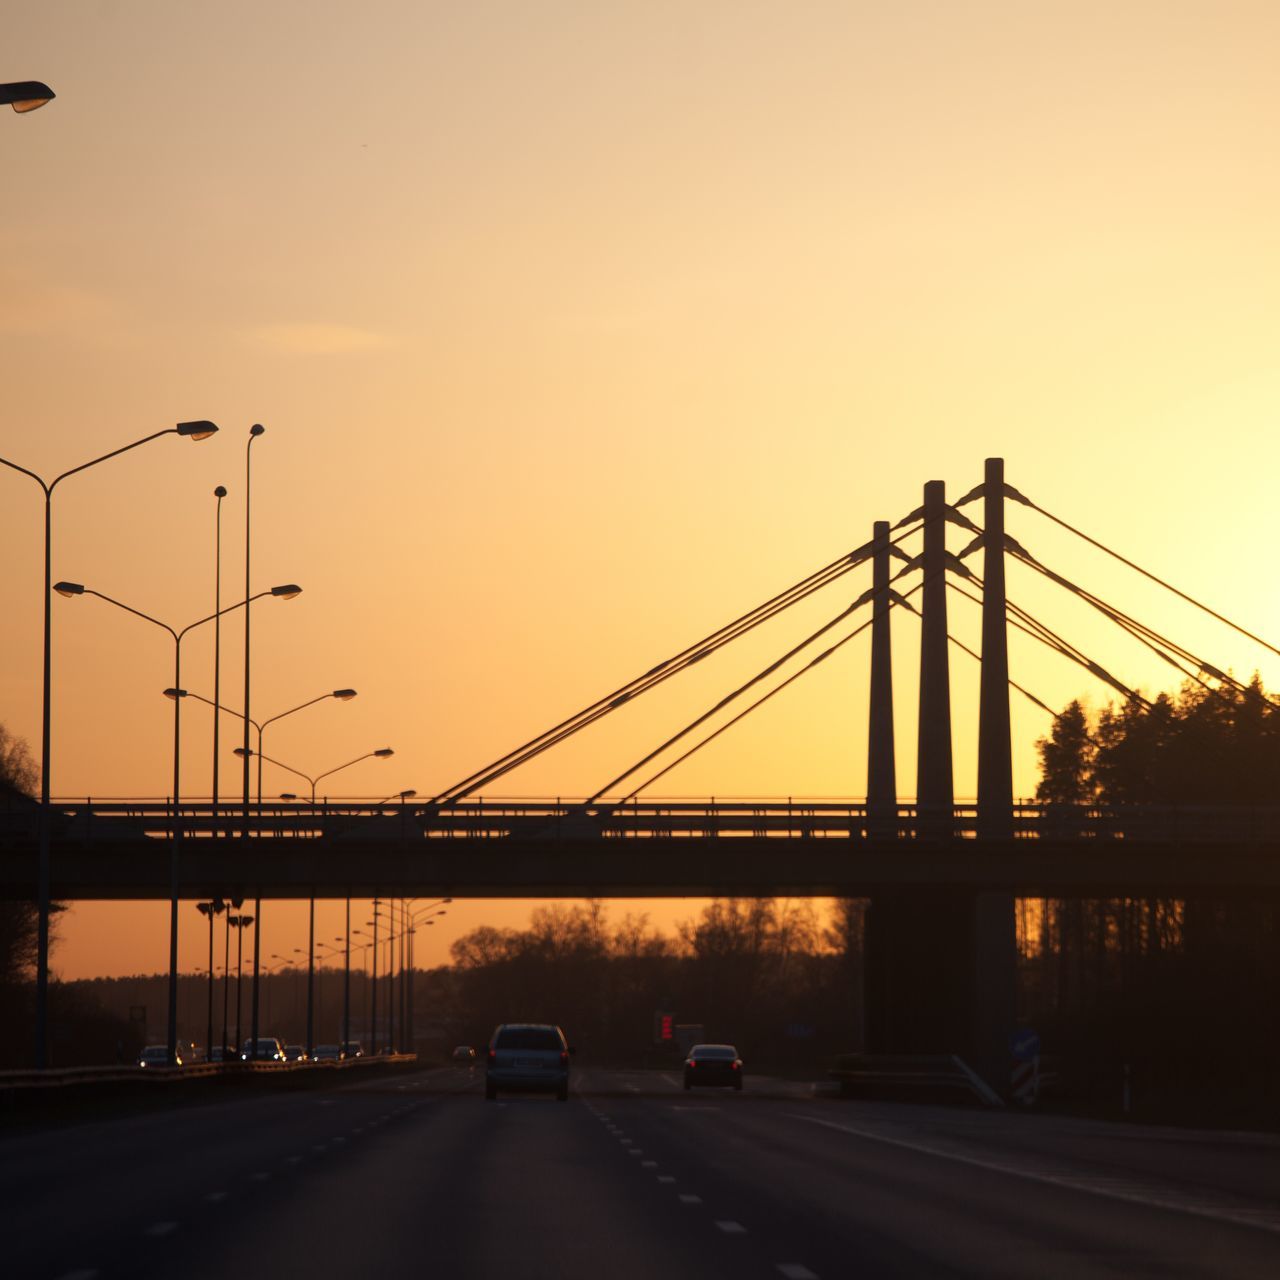 transportation, connection, bridge - man made structure, car, sunset, land vehicle, road, built structure, engineering, architecture, clear sky, mode of transport, suspension bridge, bridge, copy space, the way forward, traffic, sky, on the move, street